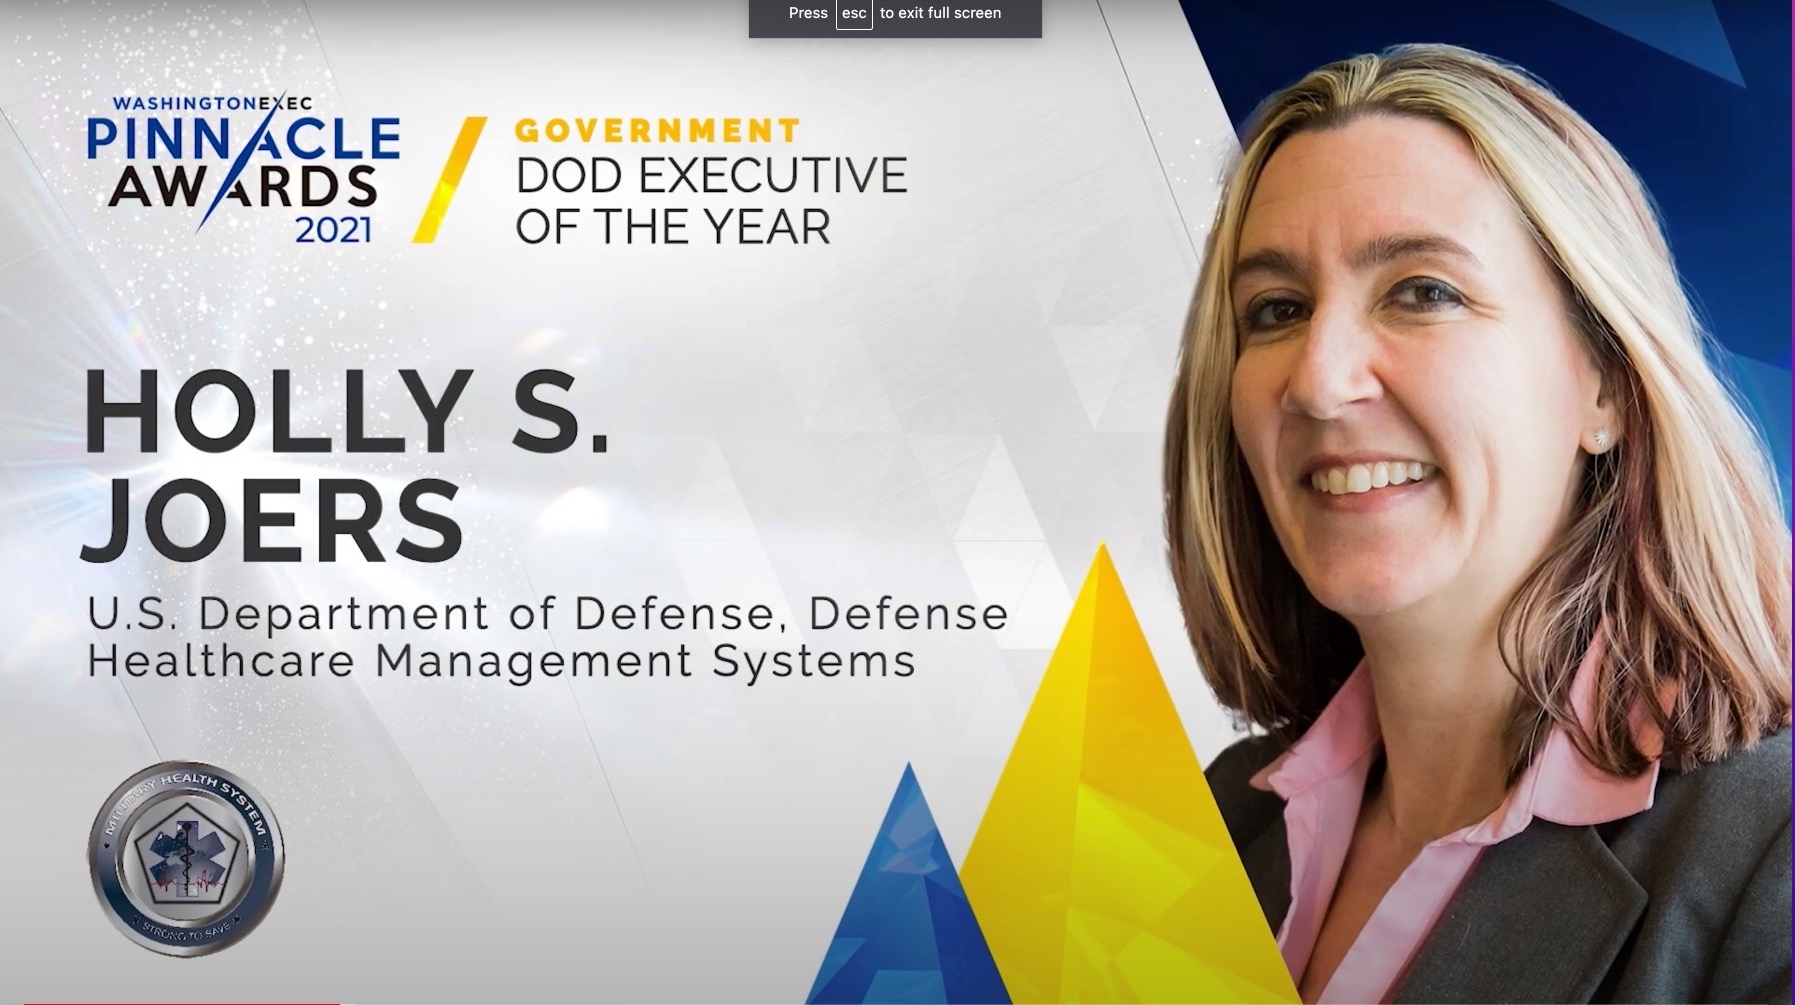 DOD - Congratulations to Holly S. Joers from the U.S. Department of Defense (Defense Healthcare Management Systems) on winning the award for DoD Executive of the Year in the Government Sector